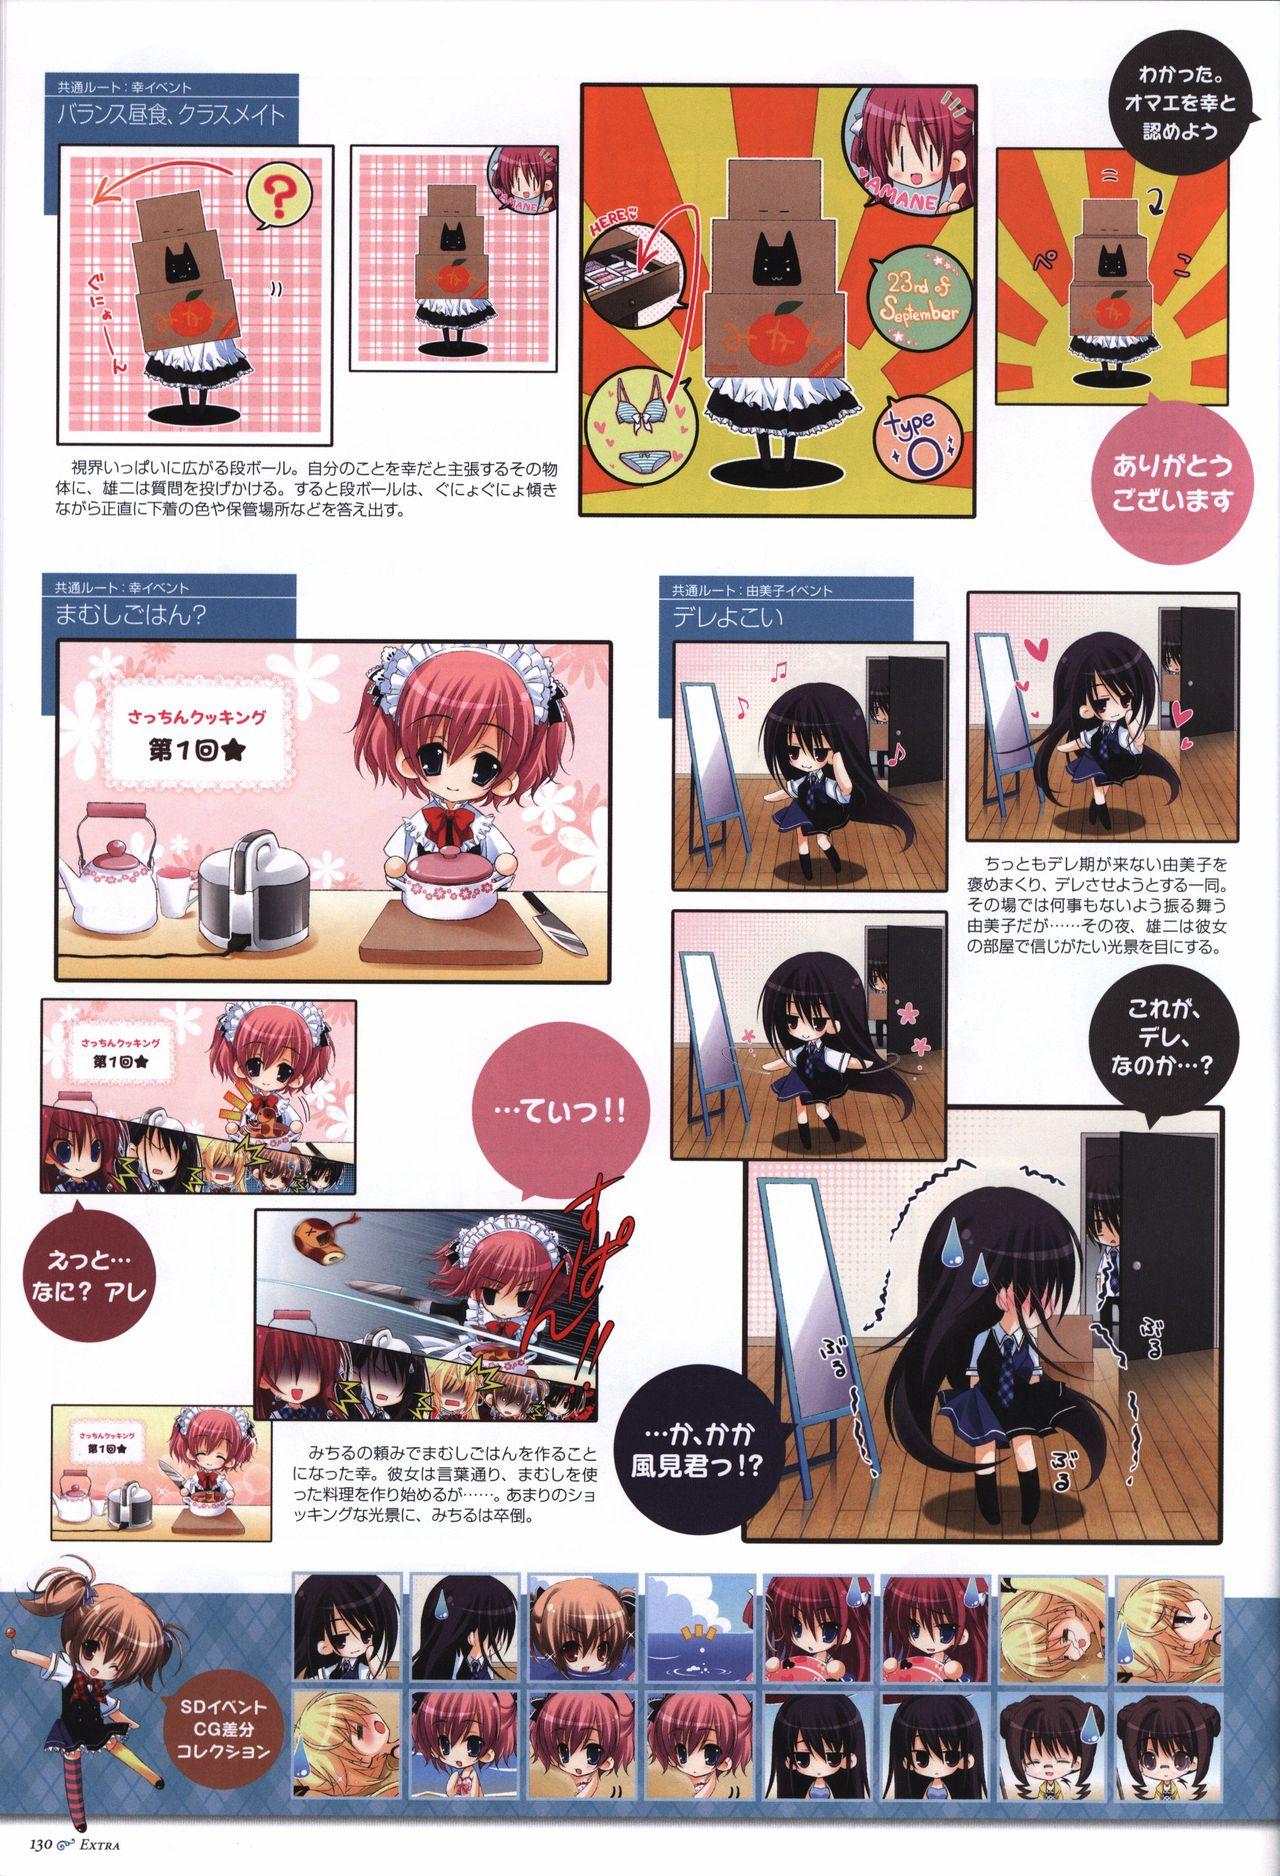 The Fruit of Grisaia Visual FanBook 130